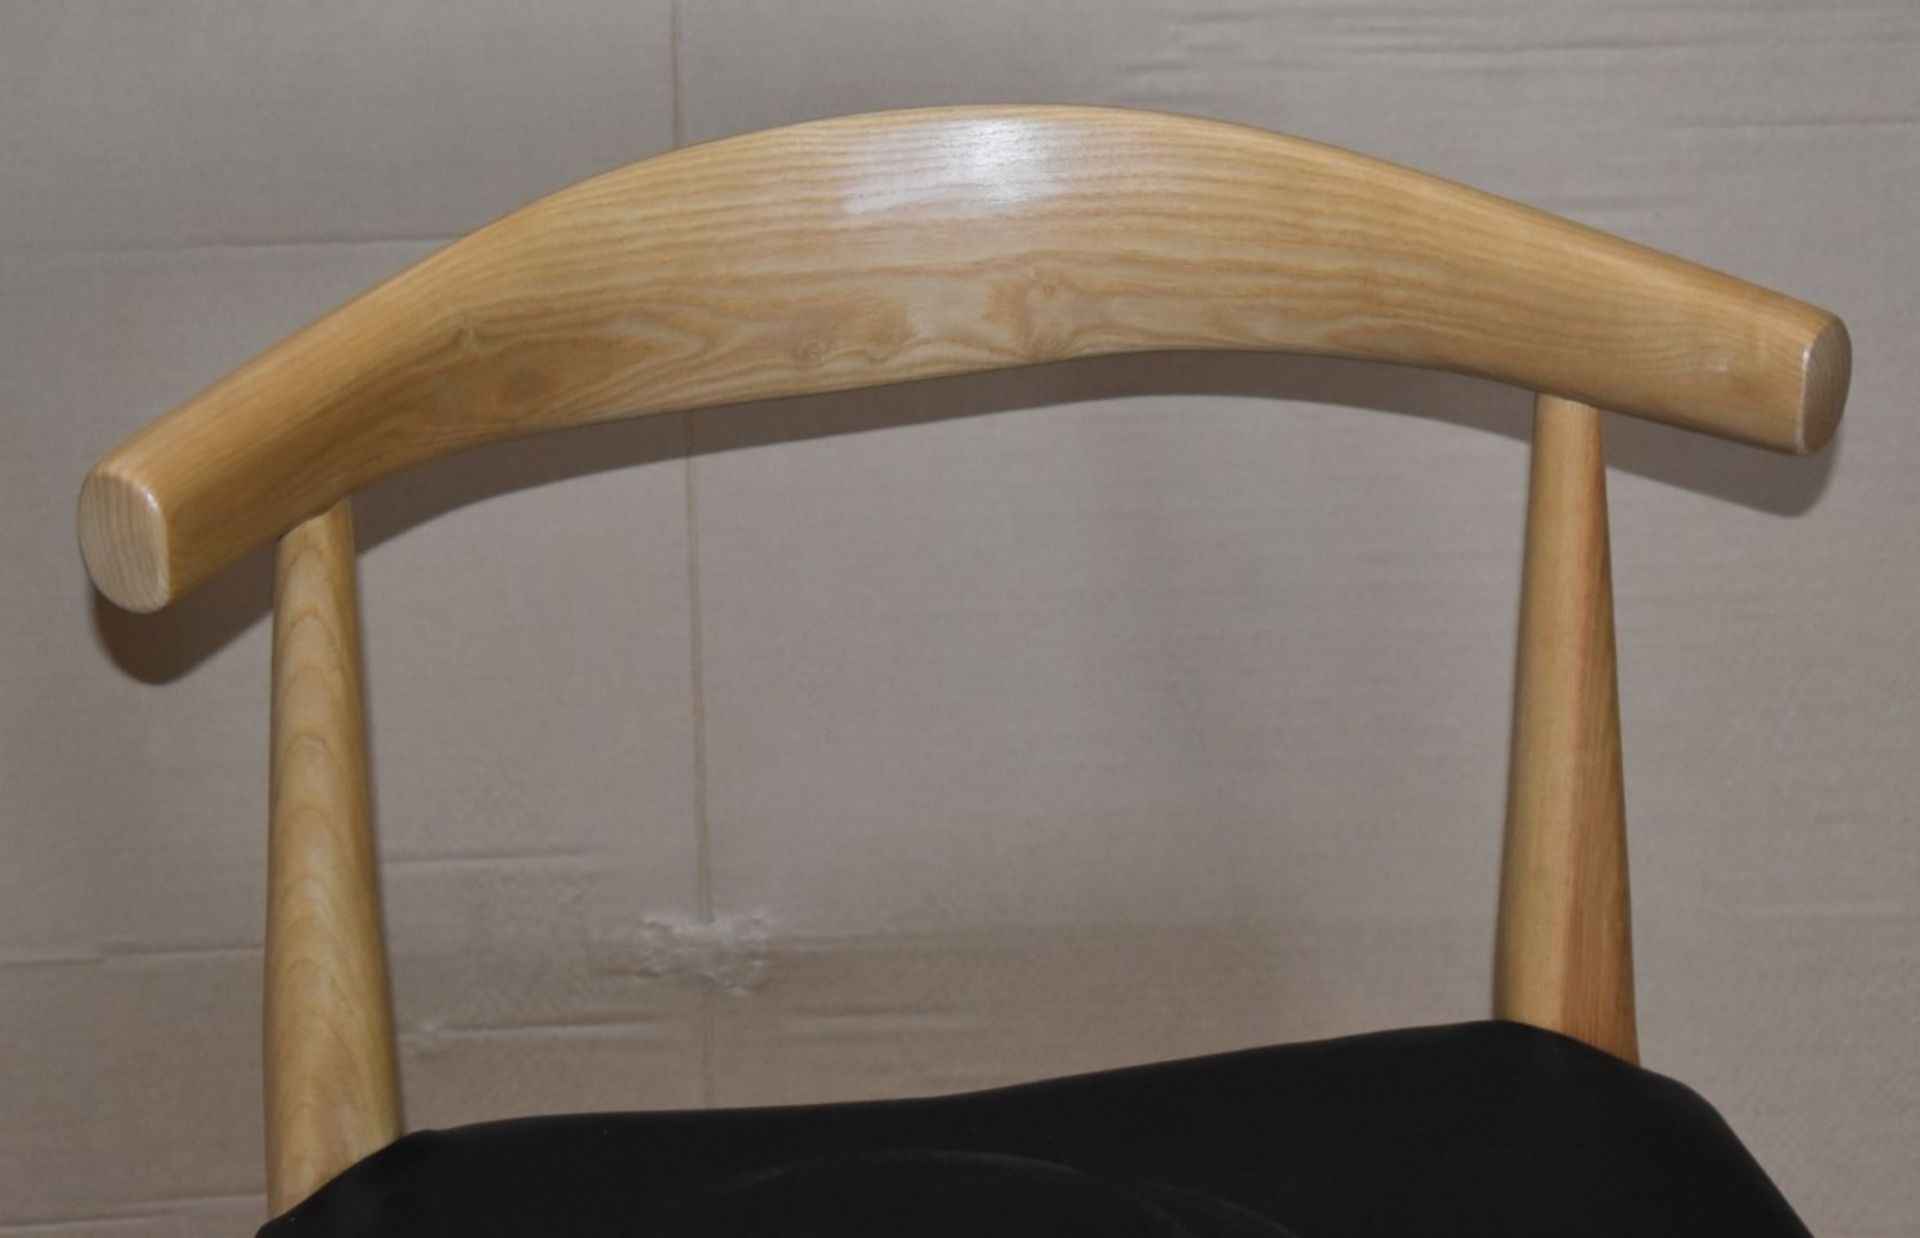 1 x Hans Wegner Inspired Elbow Chair - Solid Wood Chair With Light Stain Finish and Black Seat Pad - - Image 2 of 5